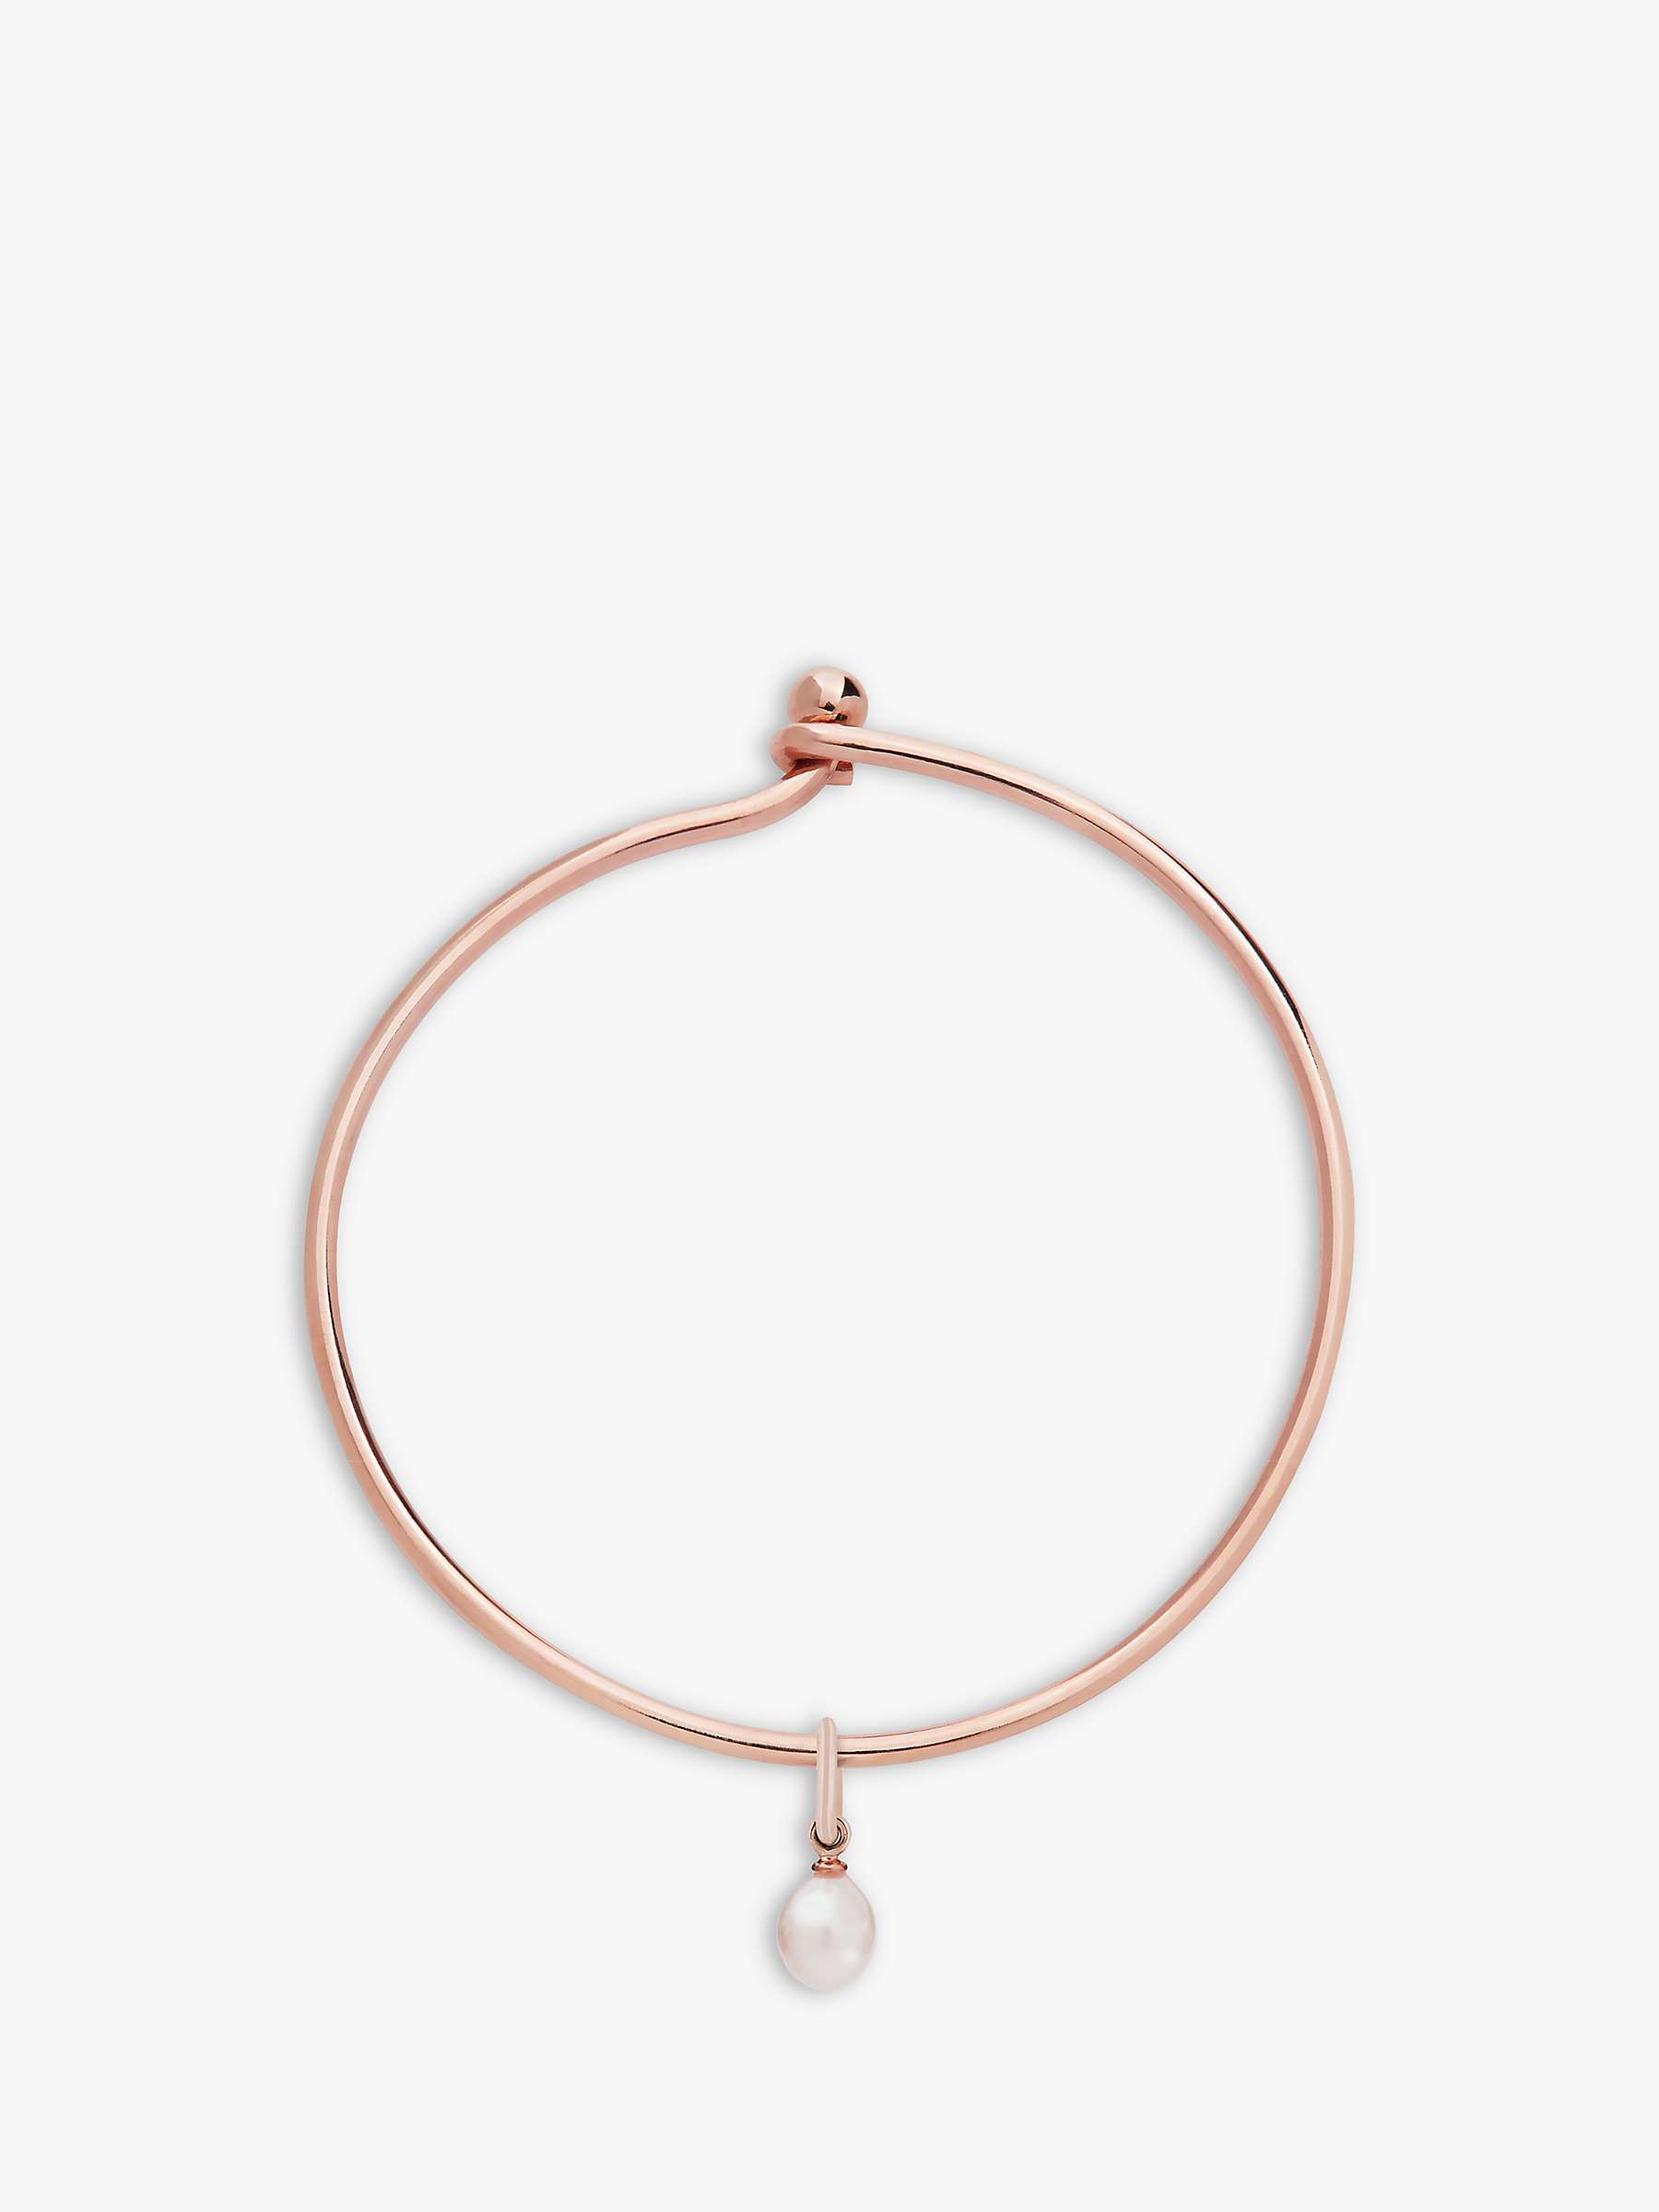 Buy Recognised Freedom Pearl Popon Bangle Online at johnlewis.com